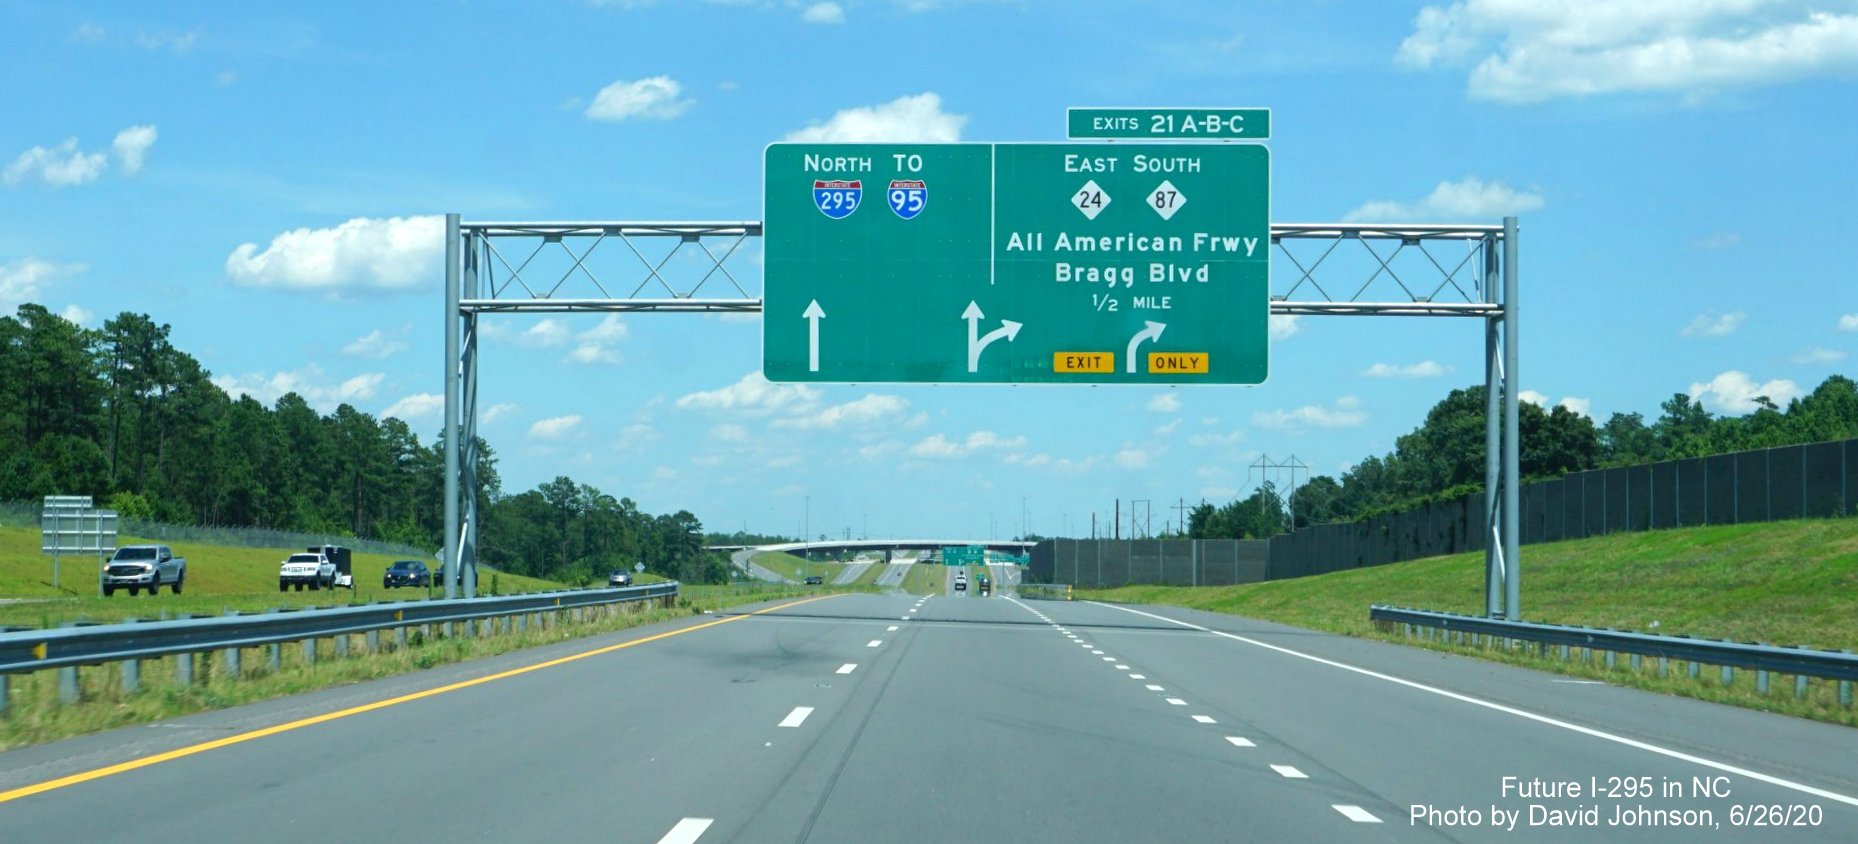 Image of overhead 1/2 Mile advancce sign for All American Freeway/Bragg Blvd exit with I-295 shield, by David Johnson June 2020